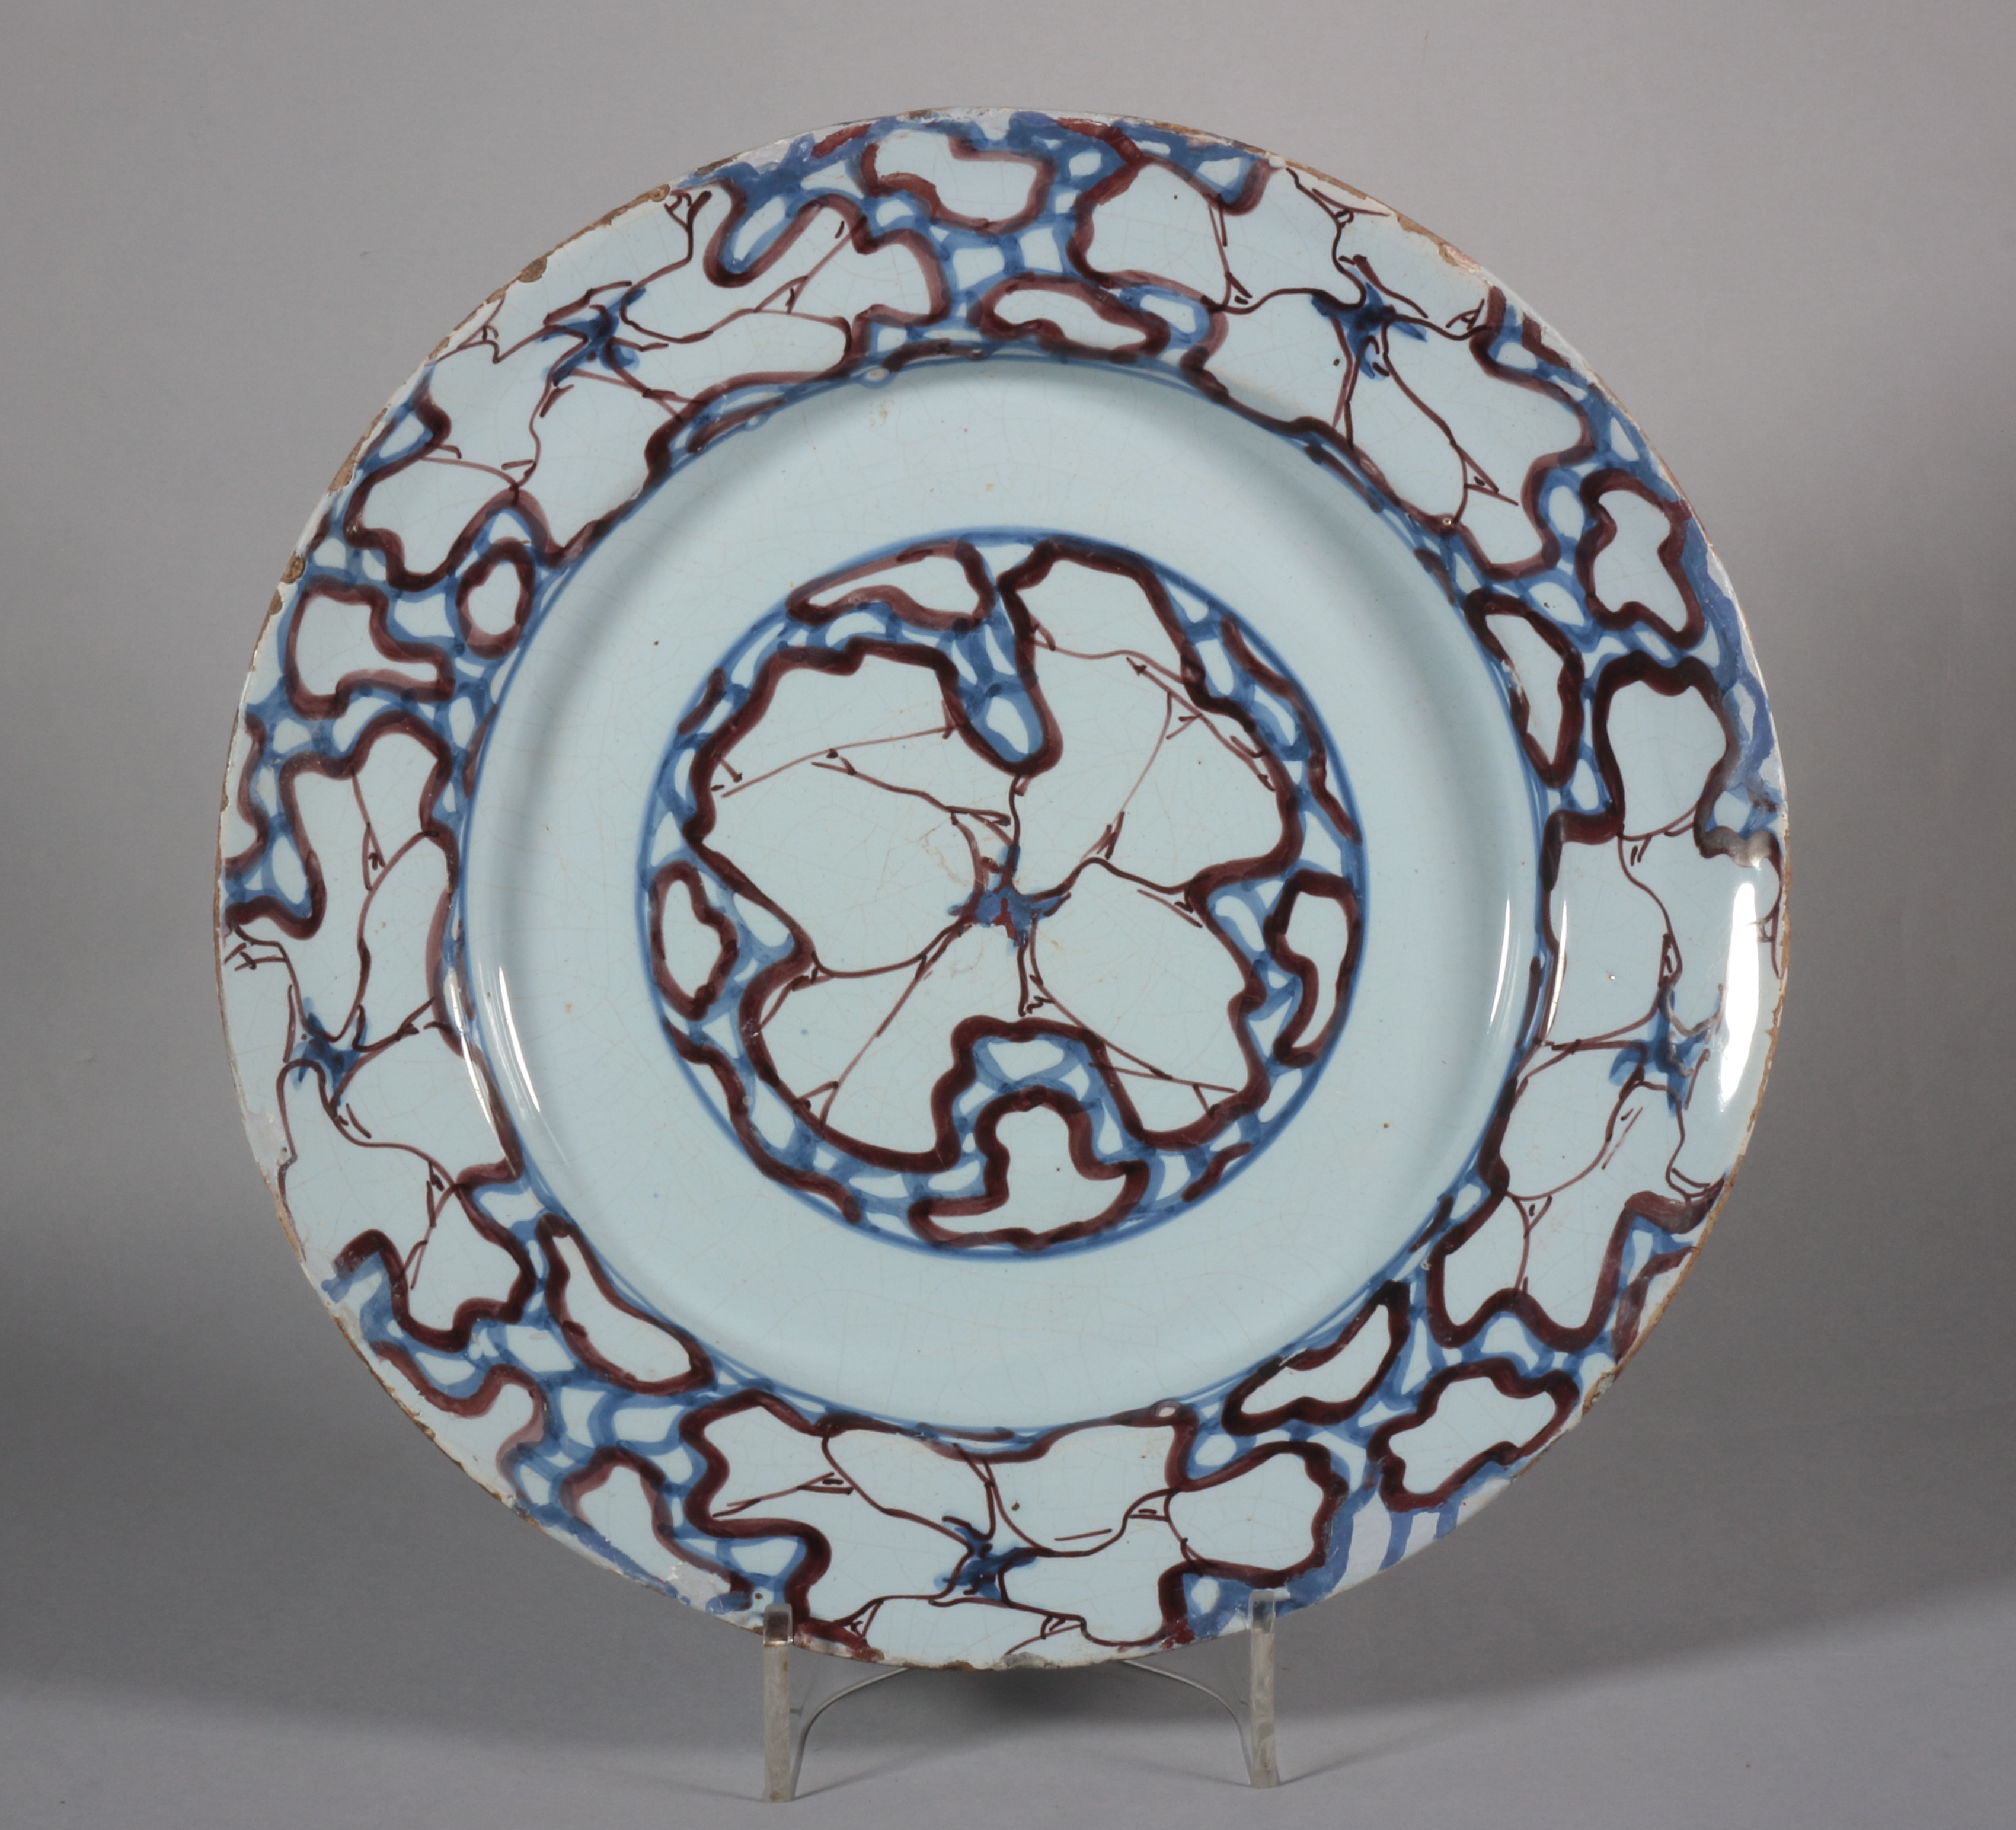 An 18th century London delft charger with cracked ice centre and border decoration, 11 3/4" dia (